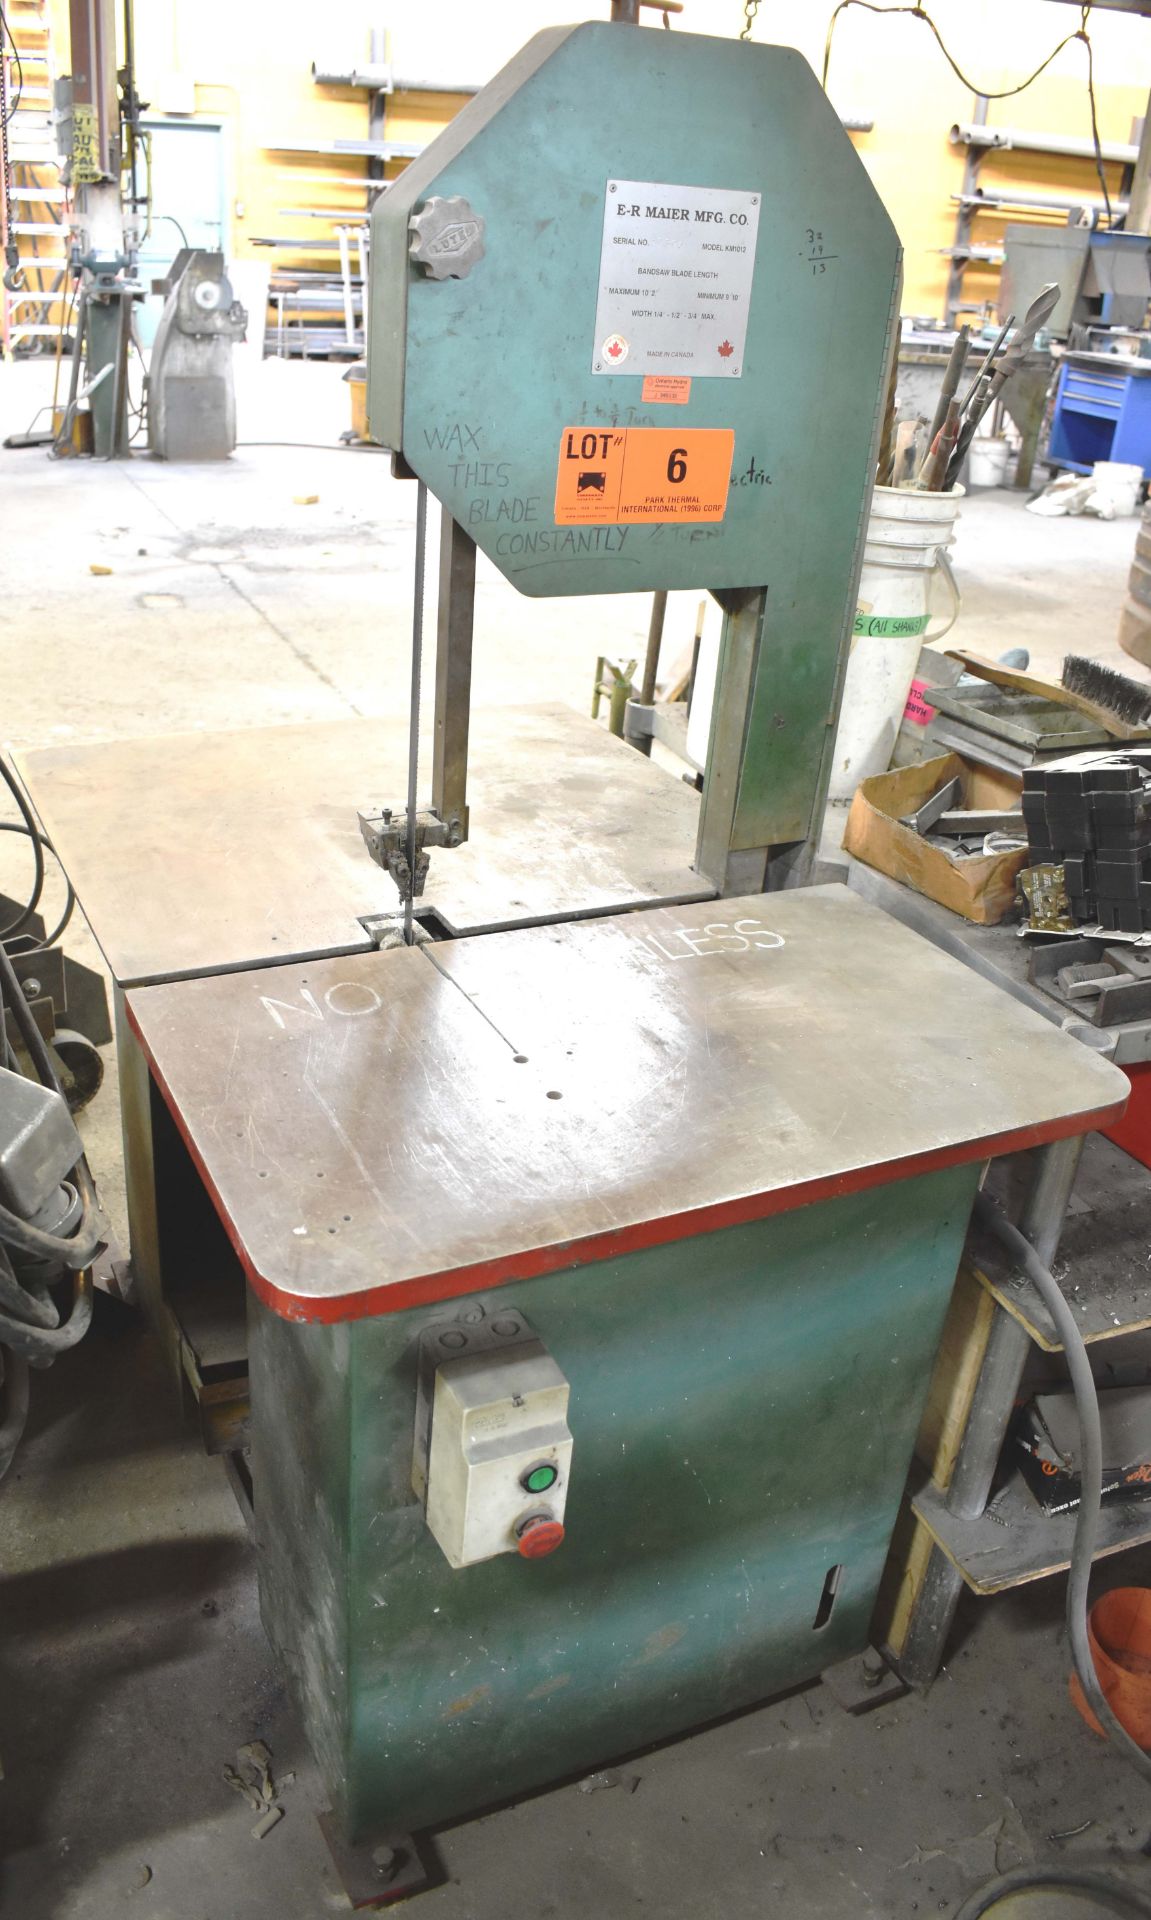 E-R MAIER KM1012 VERTICAL BAND SAW WITH 44.5"X30" TABLE, 14" THROAT, 16.5" MAX. WORKPIECE HEIGHT,